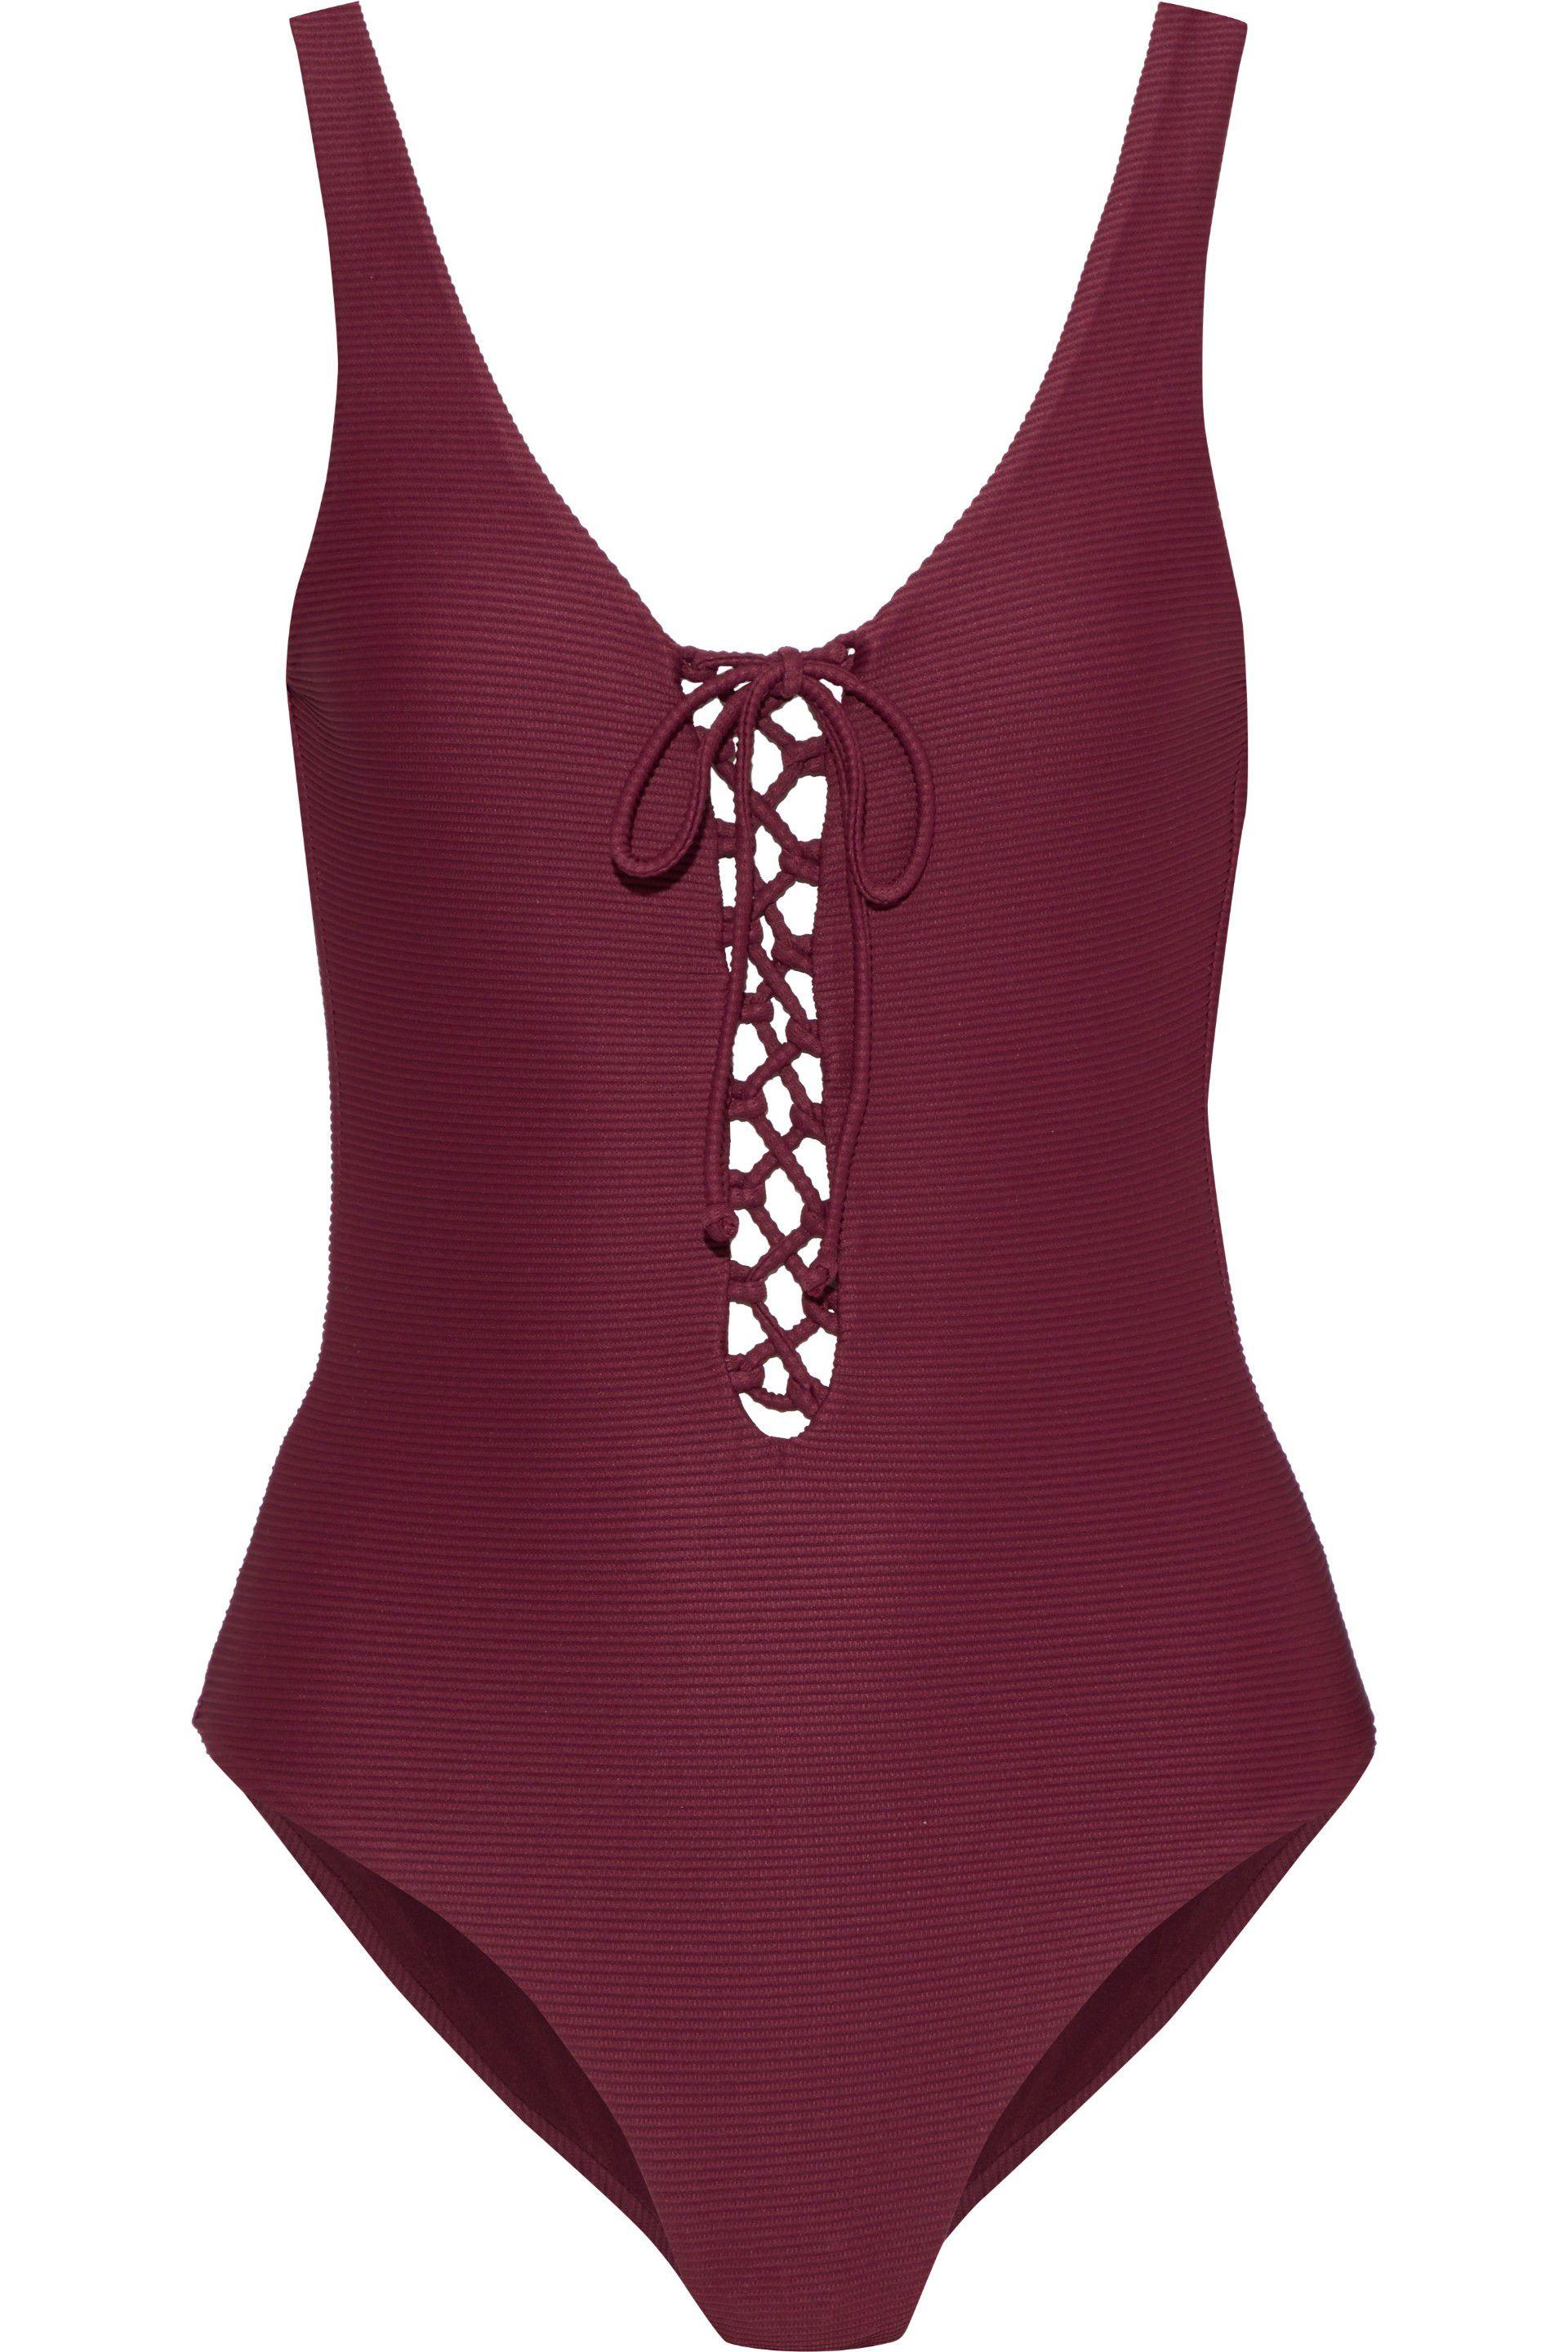 Onia Woman Bridget Lace-up Ribbed Swimsuit Burgundy in Purple - Lyst